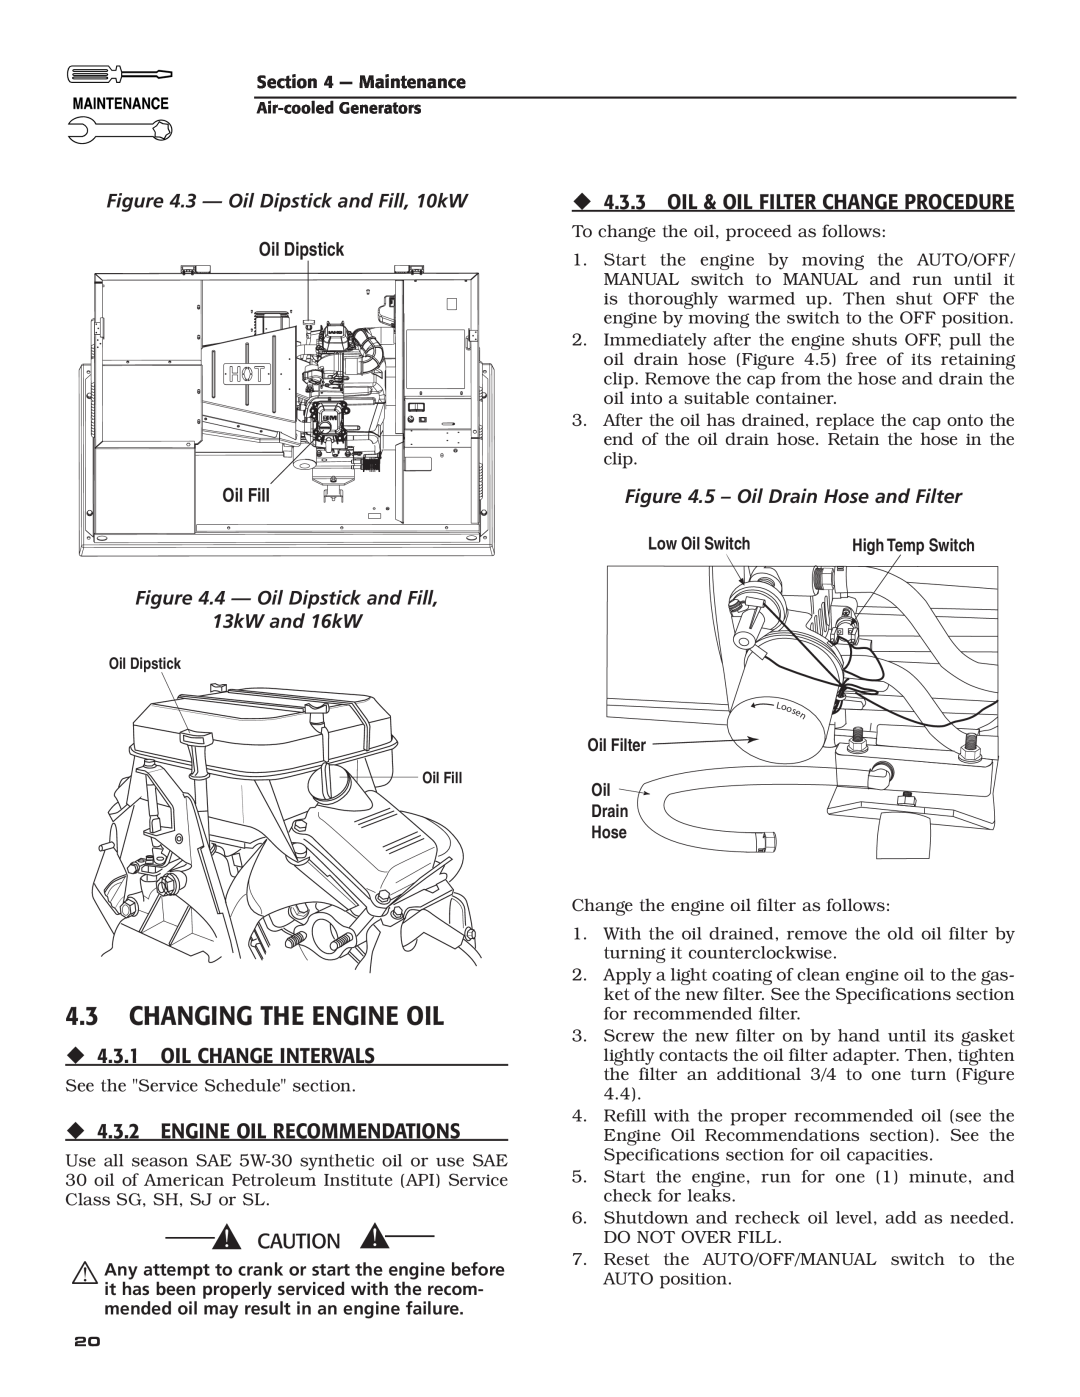 Guardian Technologies 005283 4.3CHANGING THE ENGINE OIL, ‹4.3.1 OIL CHANGE INTERVALS, ‹4.3.2 ENGINE OIL RECOMMENDATIONS 